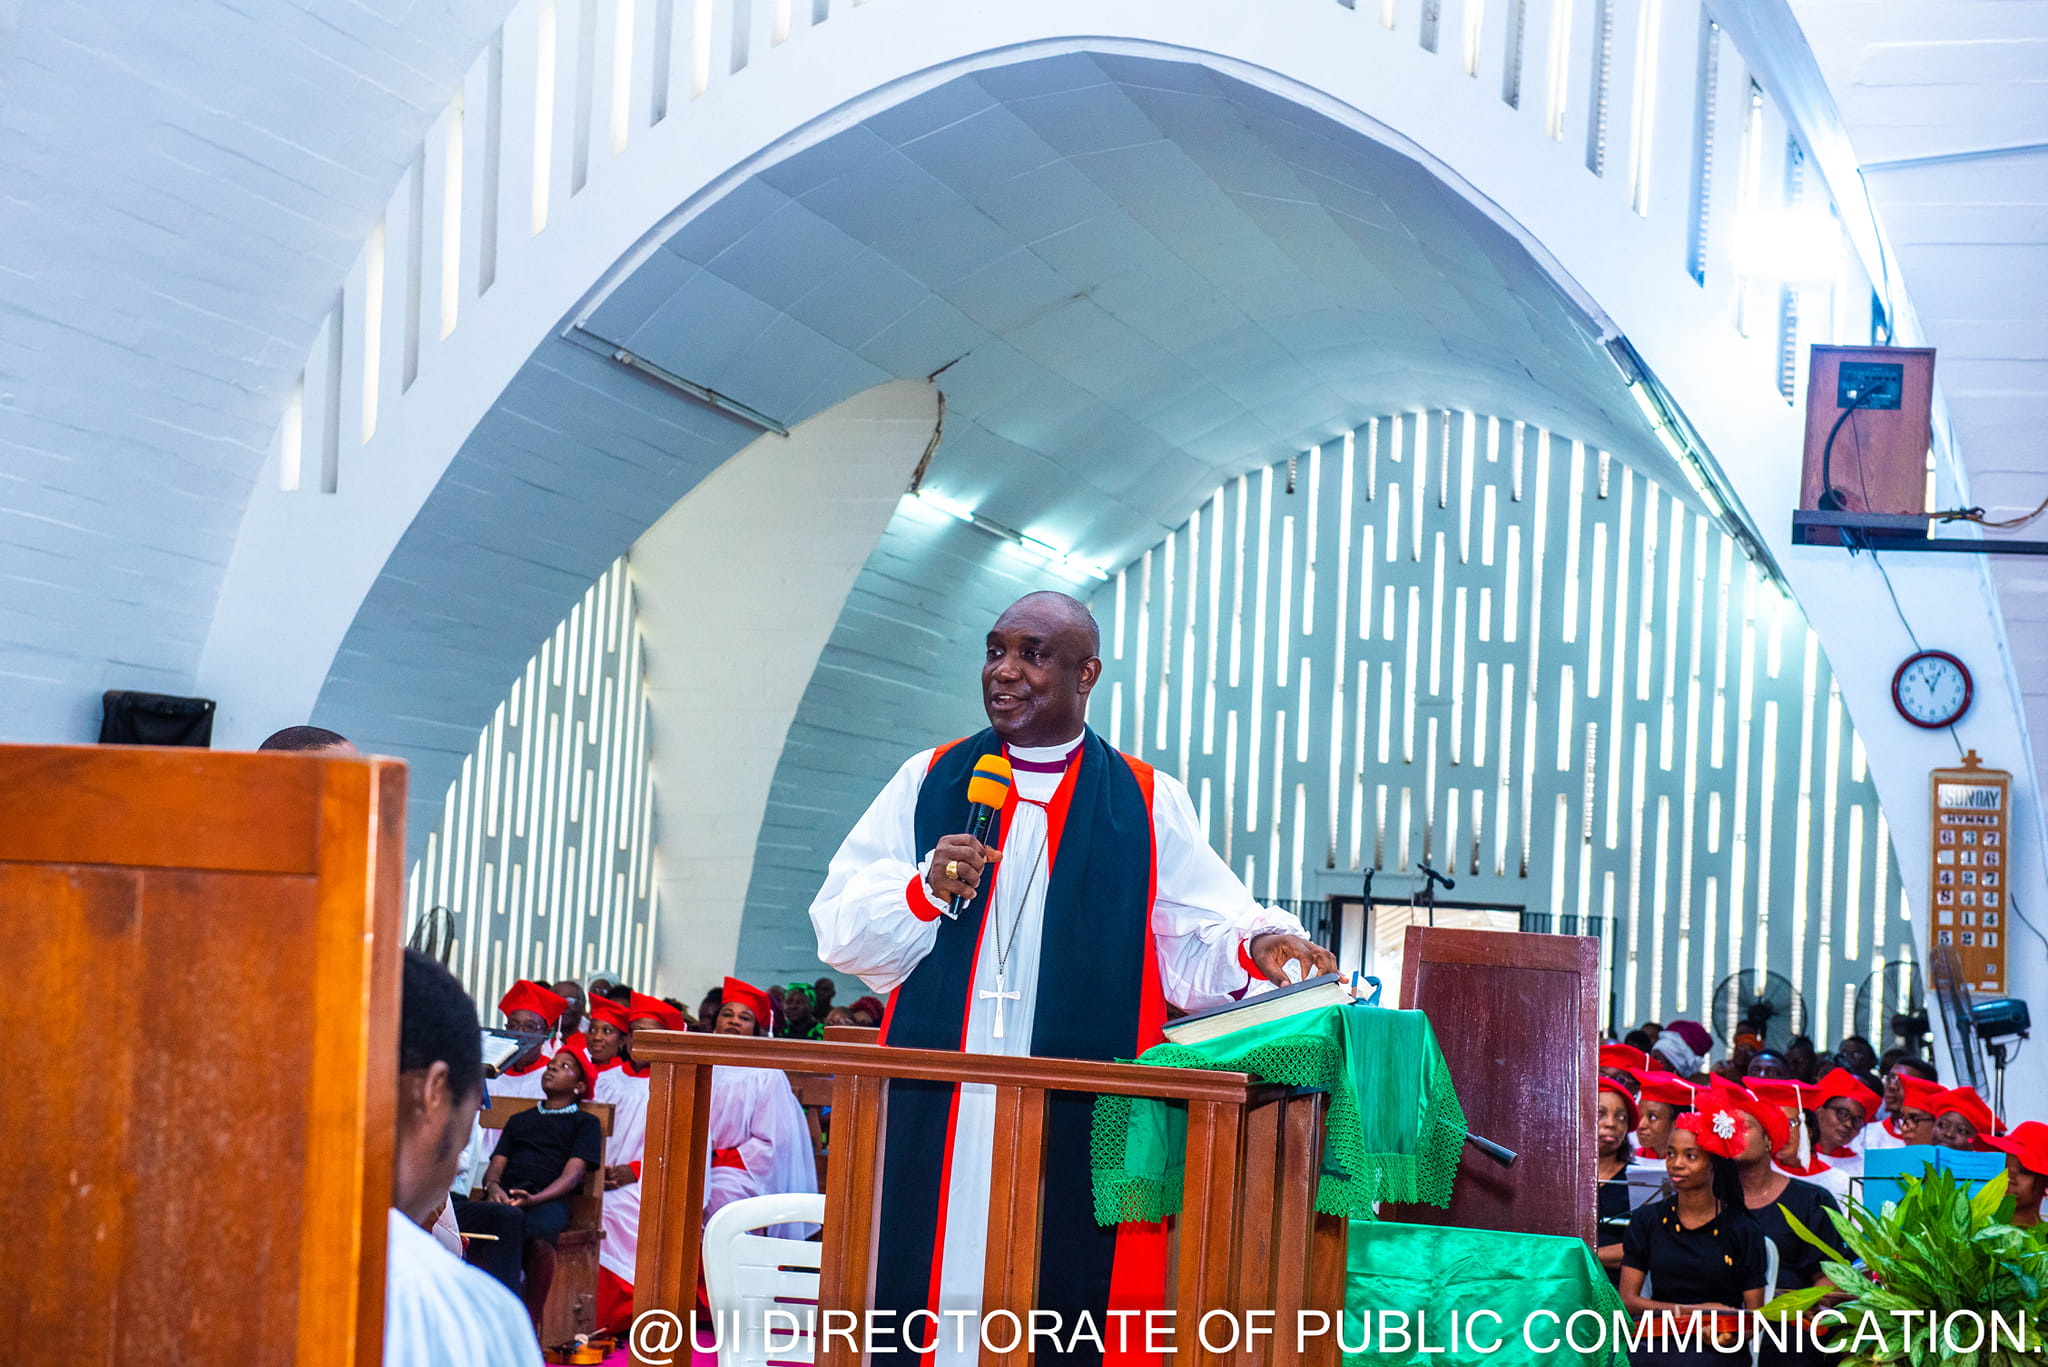 “UI is a land of upliftment, fulfilment, and greatness,” says Guest Preacher at Foundation Day Service